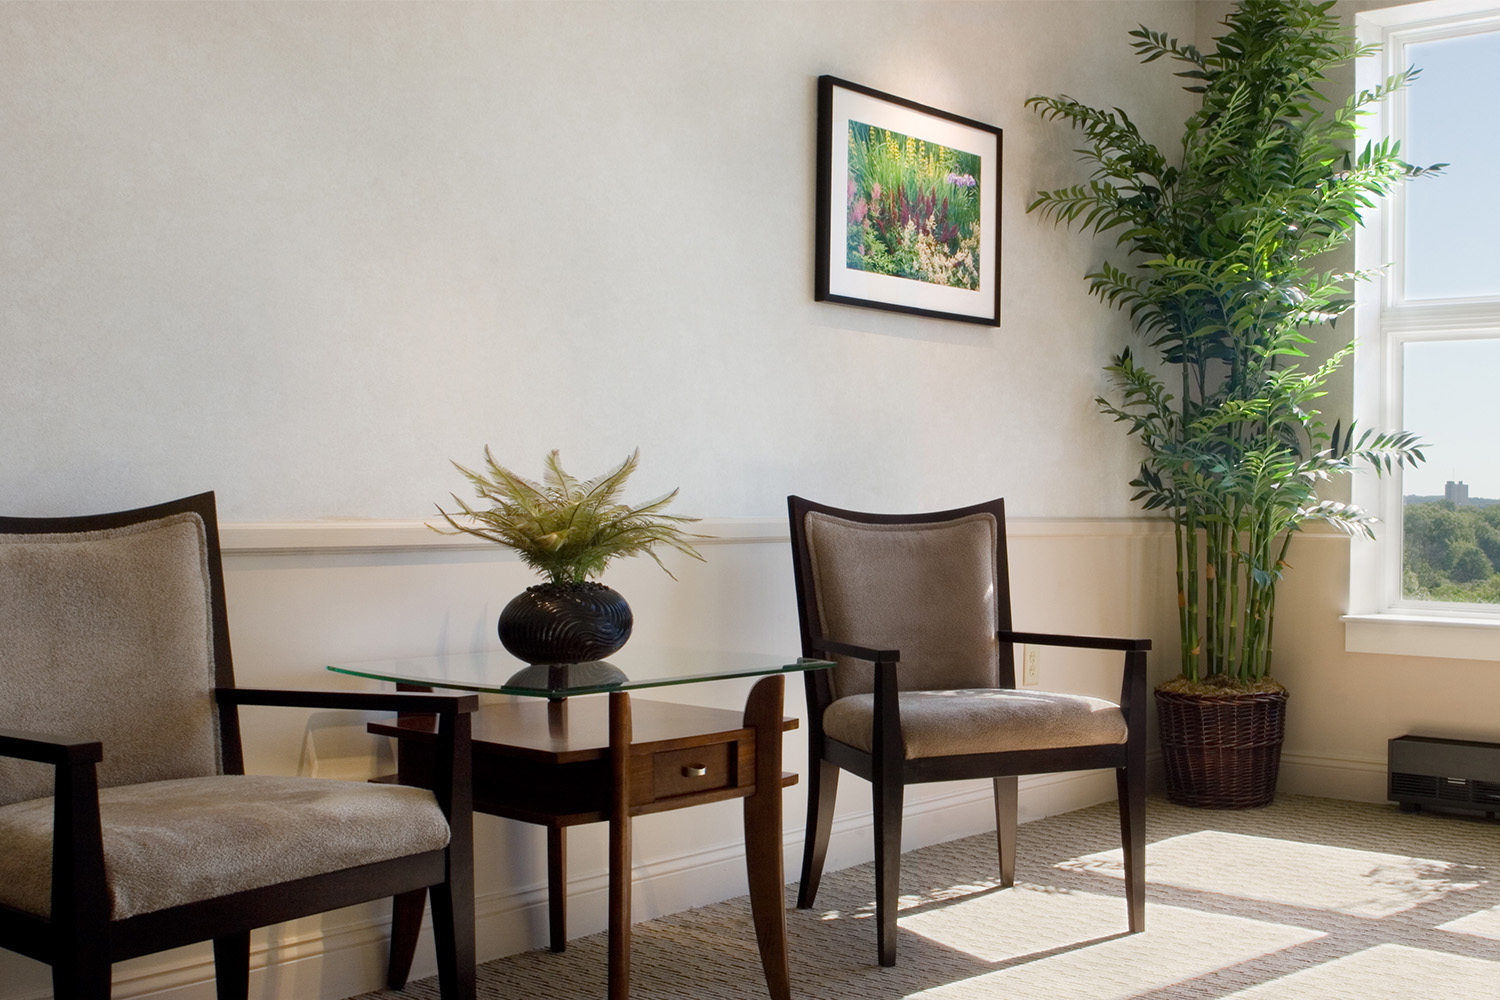 Elegant cream colored lobby with seating and planters 